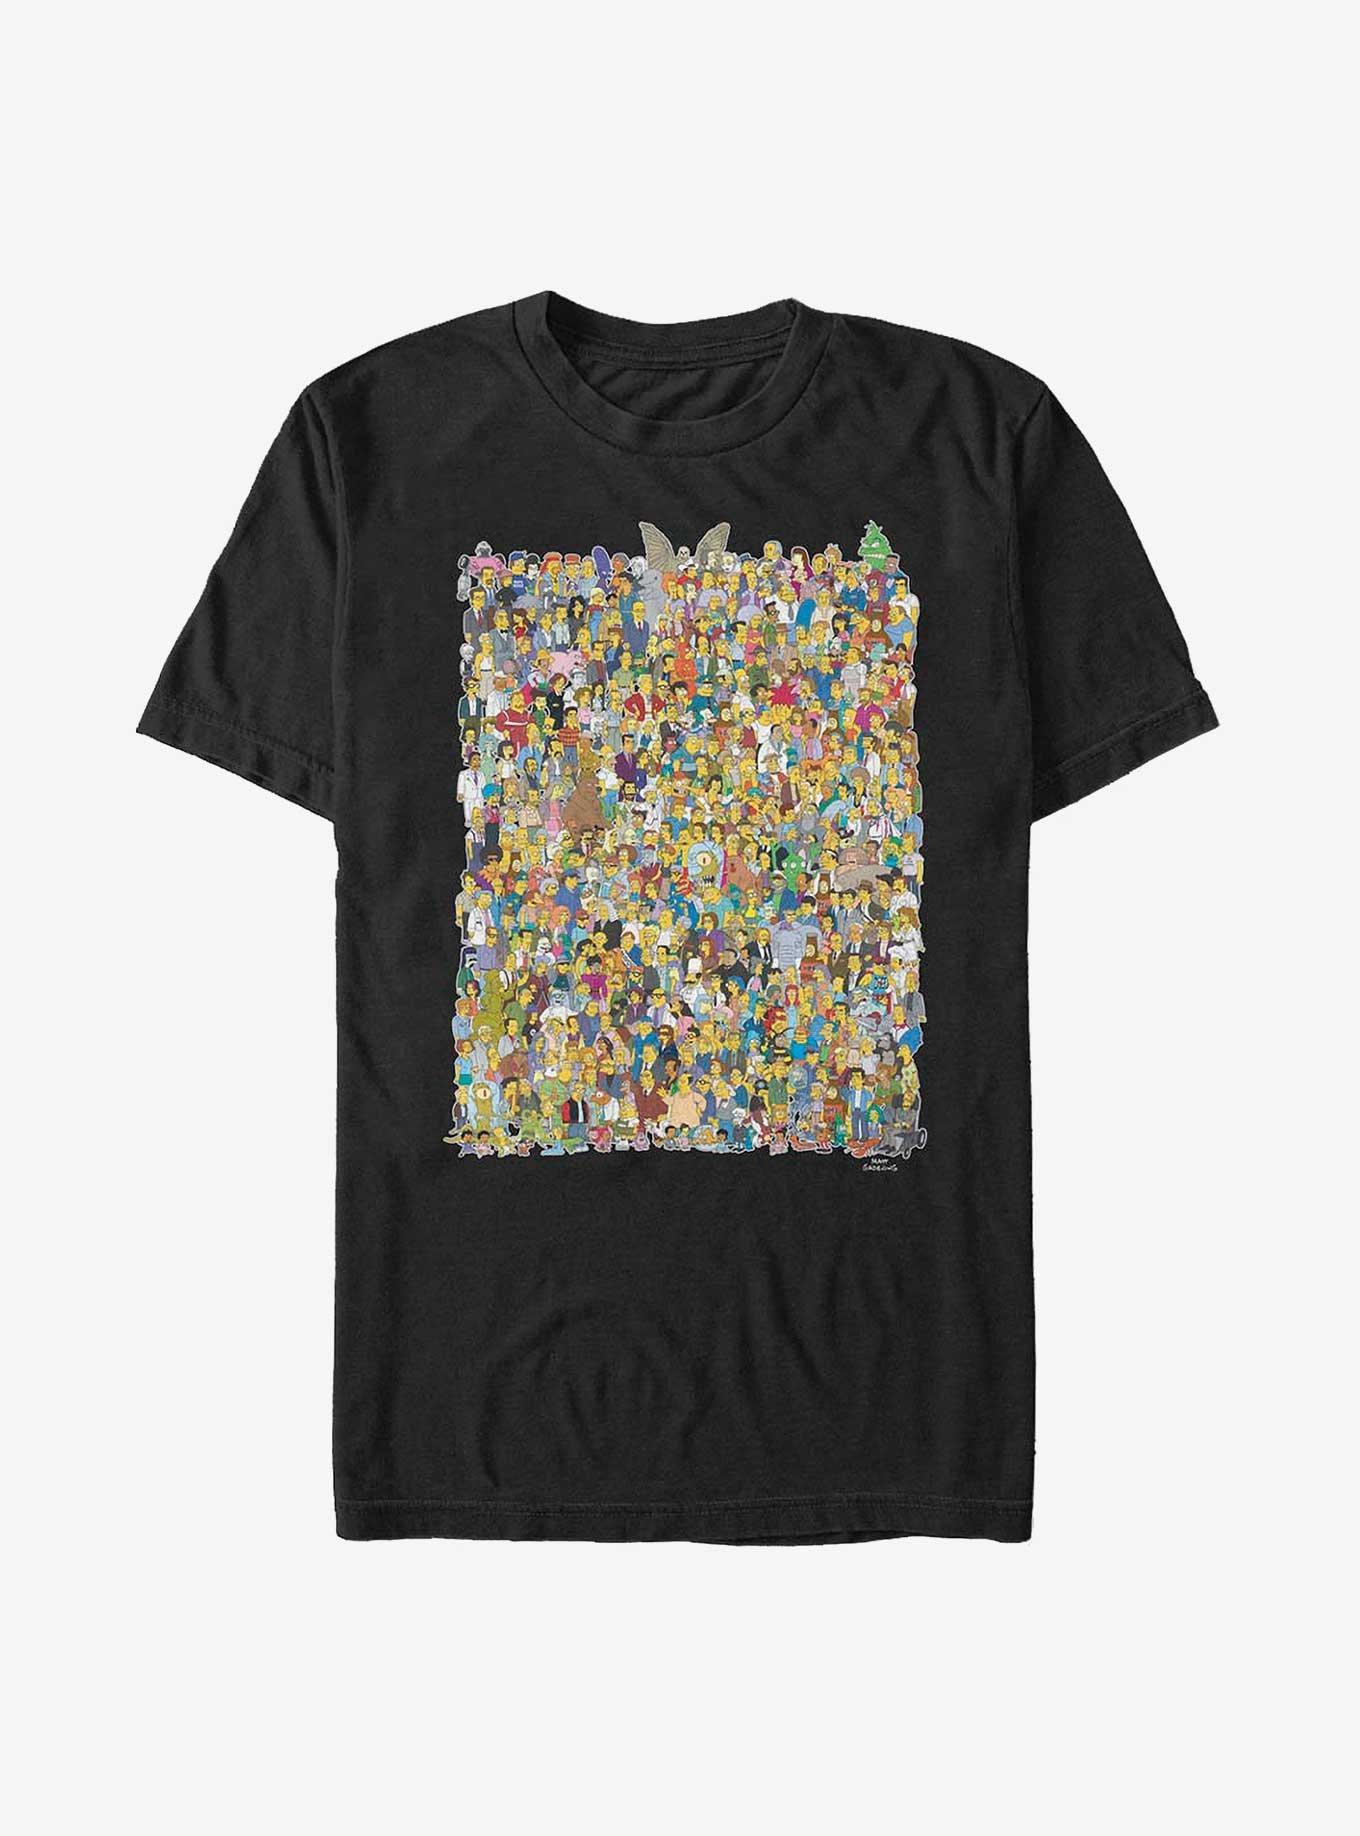 The Simpsons All Of Springfield T-Shirt, BLACK, hi-res